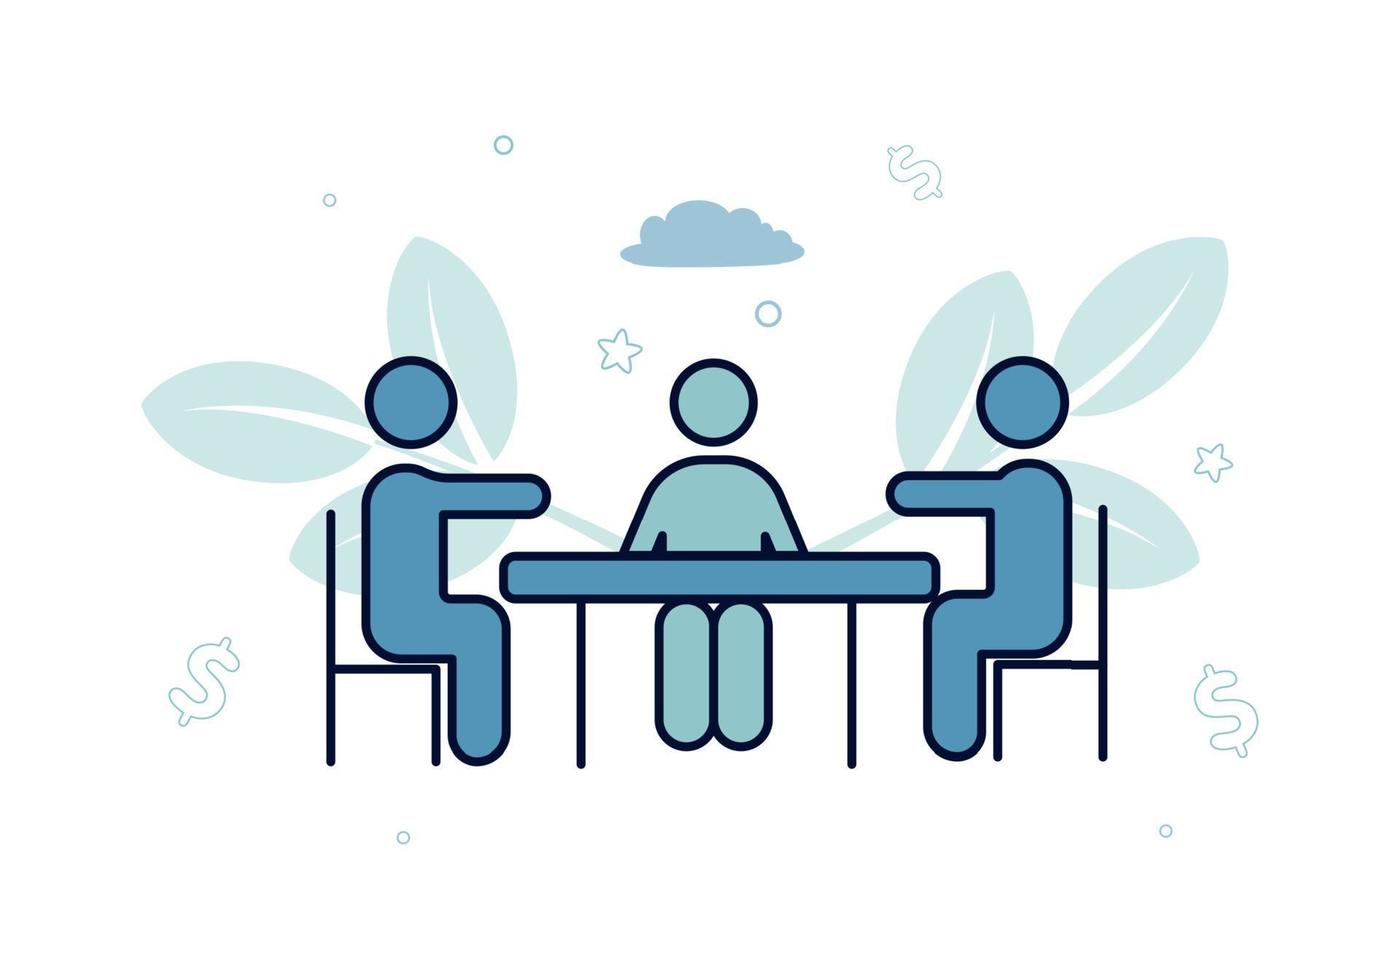 Finance. Vector illustration of factoring. Three silhouettes of people are sitting at the table, against a background of leaves, dollar signs, clouds, stars